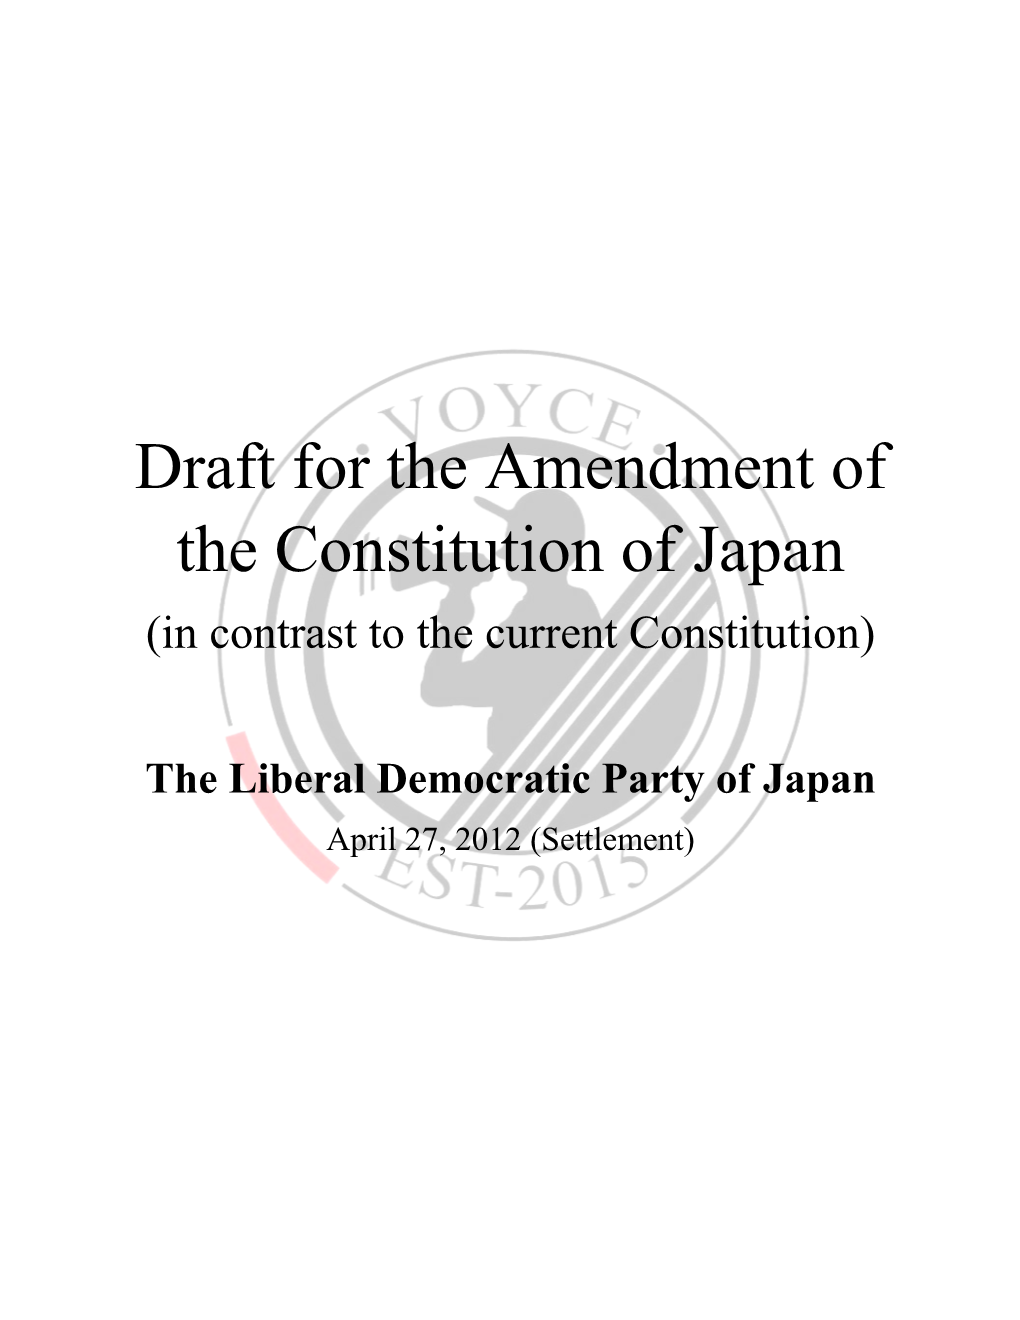 Draft for the Amendment of the Constitution of Japan (In Contrast to the Current Constitution)